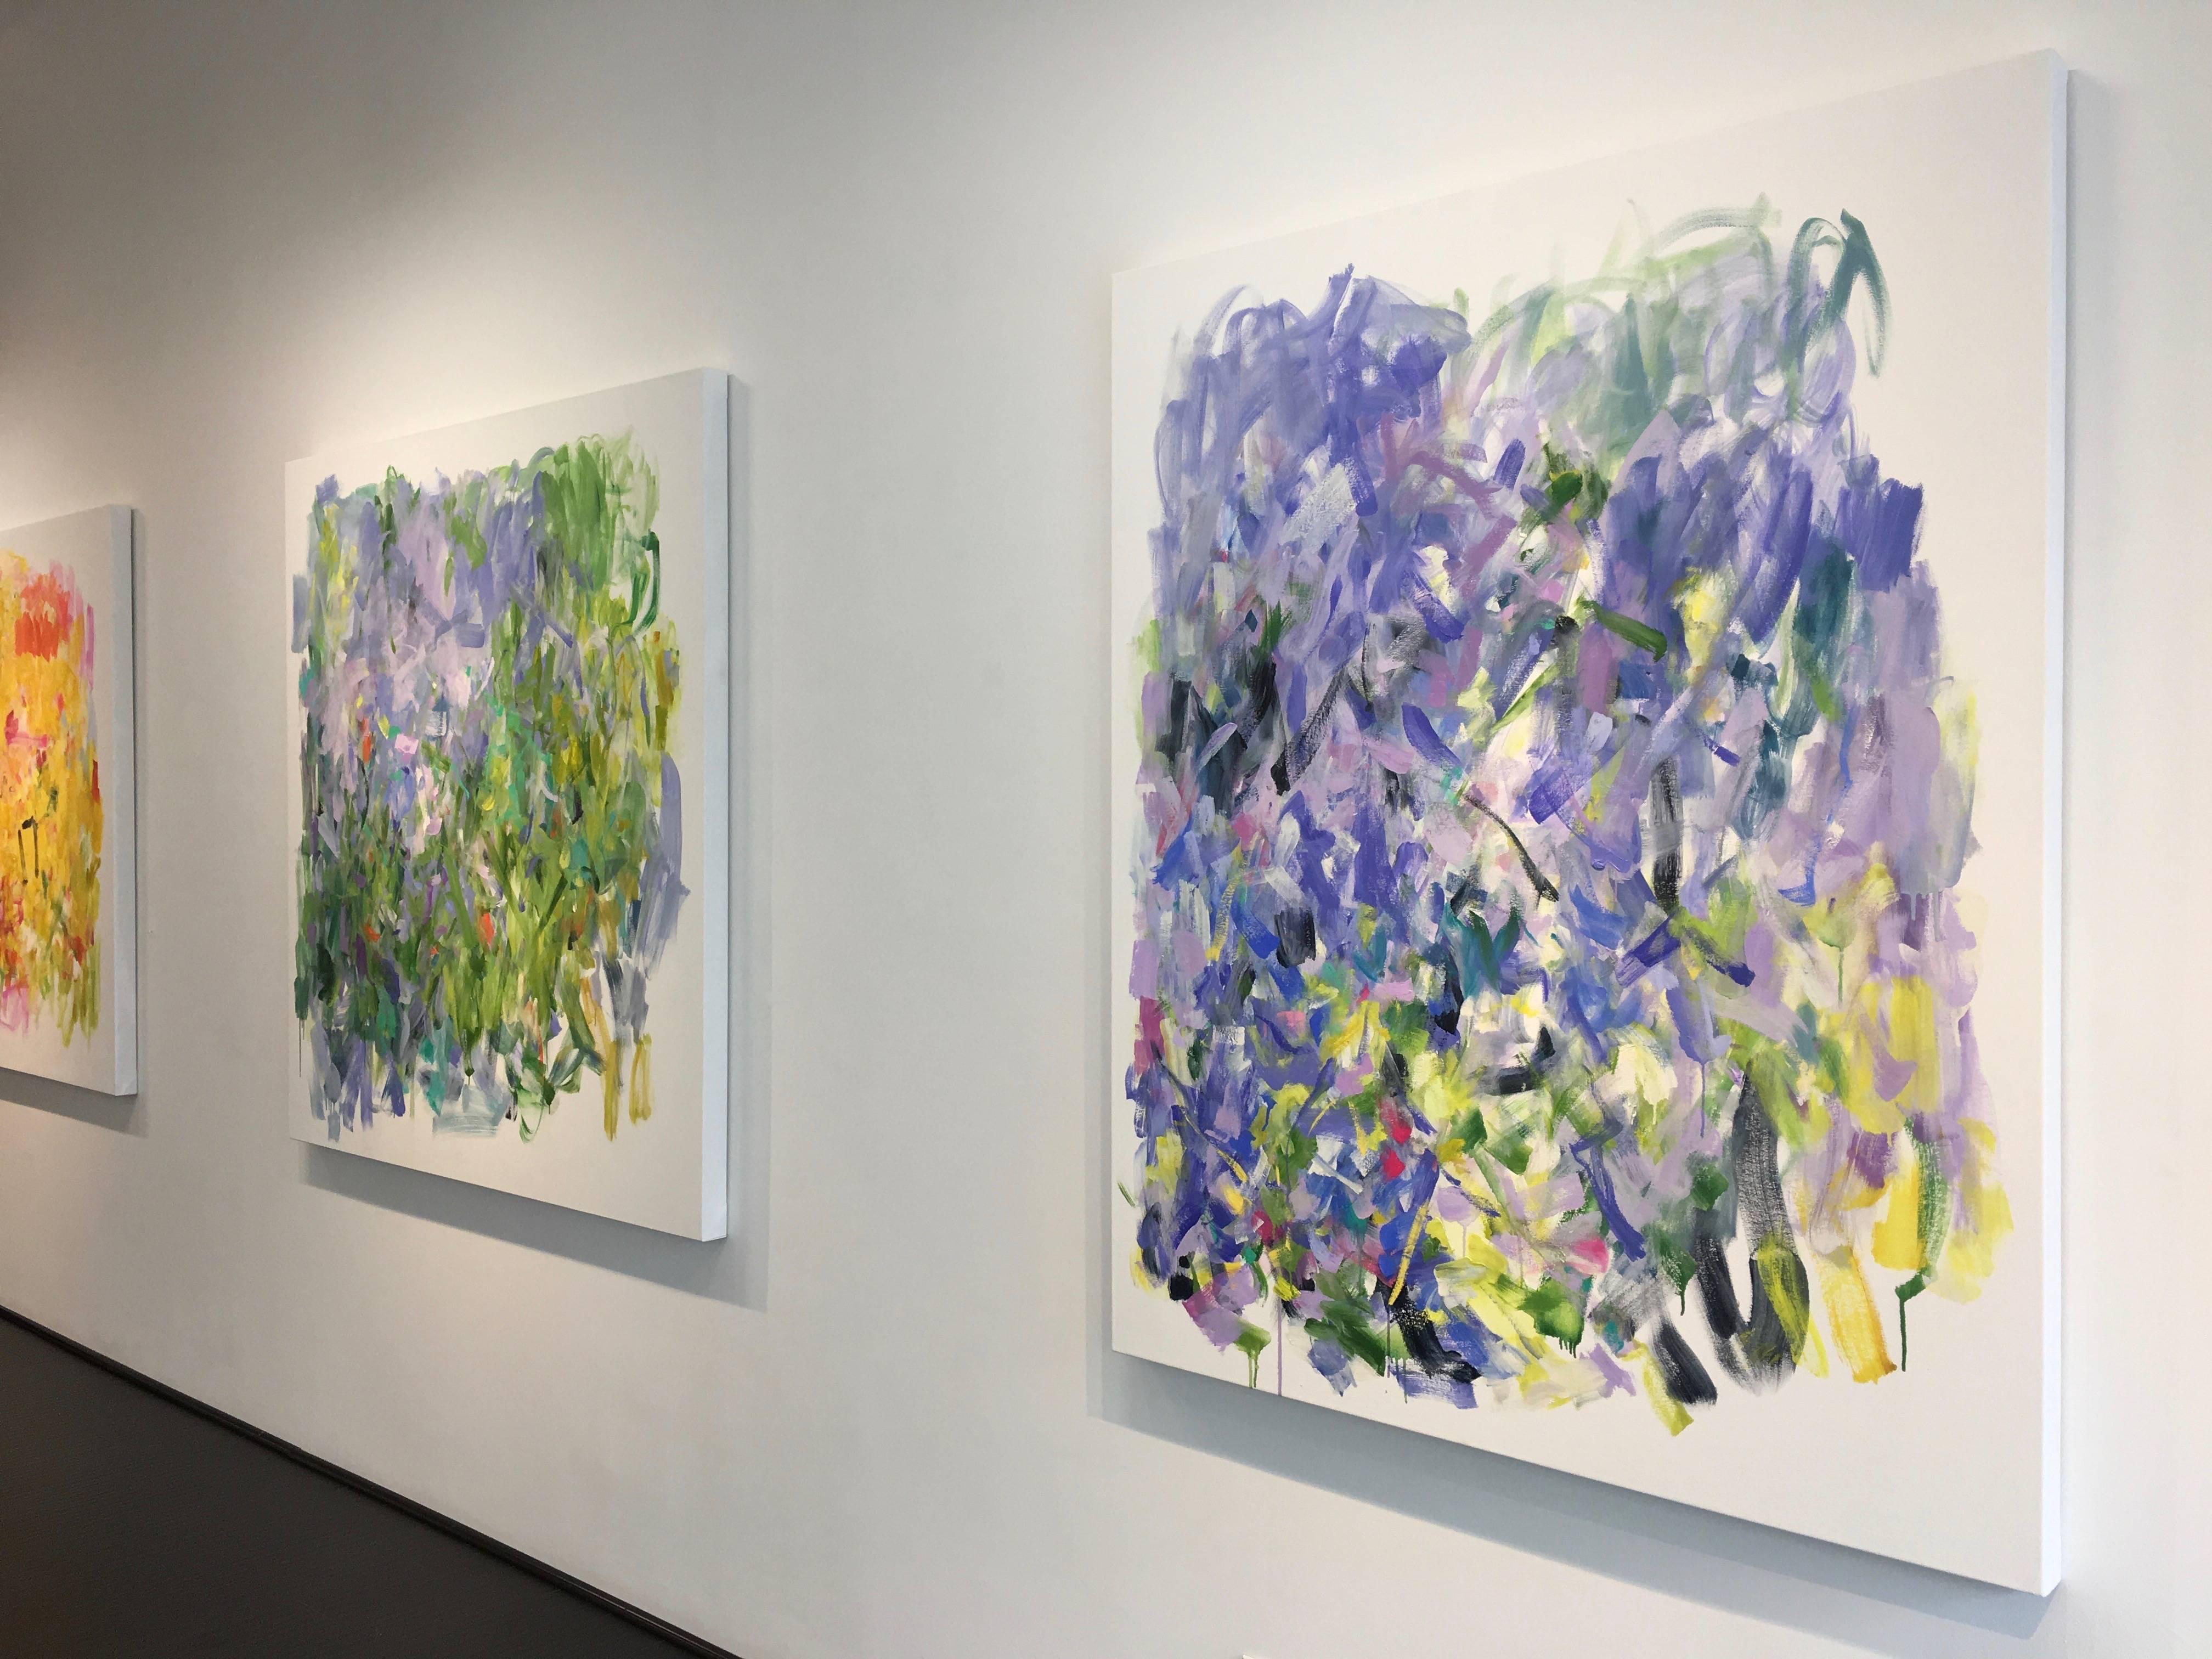 Yolanda Sánchez's ...That's How the Light Gets In is a beautiful, large, abstract oil painting. Shades of purple, violet blue, and green dance around the vertical canvas. Hints of yellow, yellow-green and bright pink illuminate the cooler